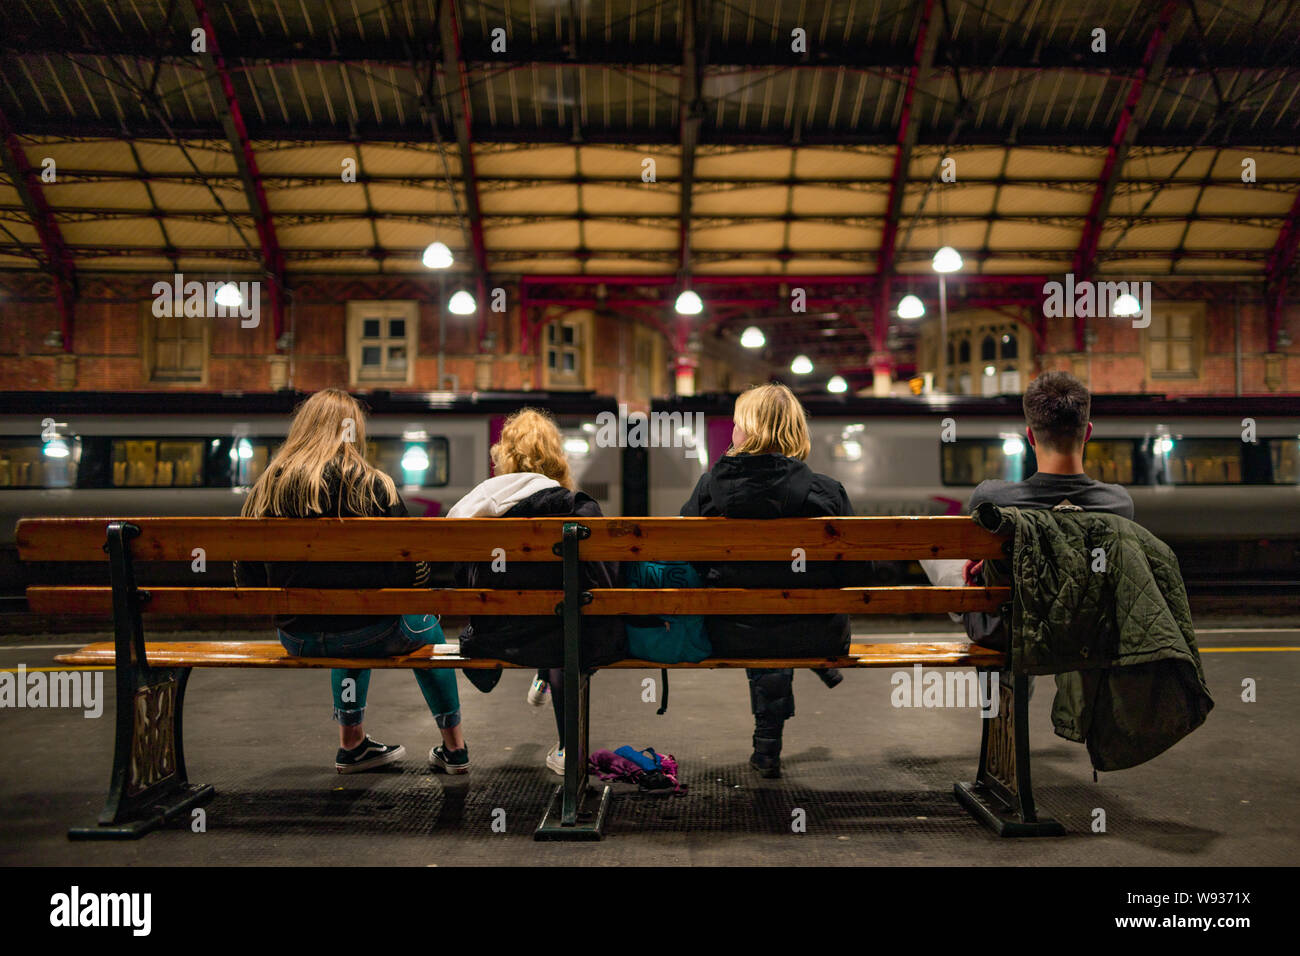 Seated people waiting at the train station Temple Meads Bristol Stock Photo